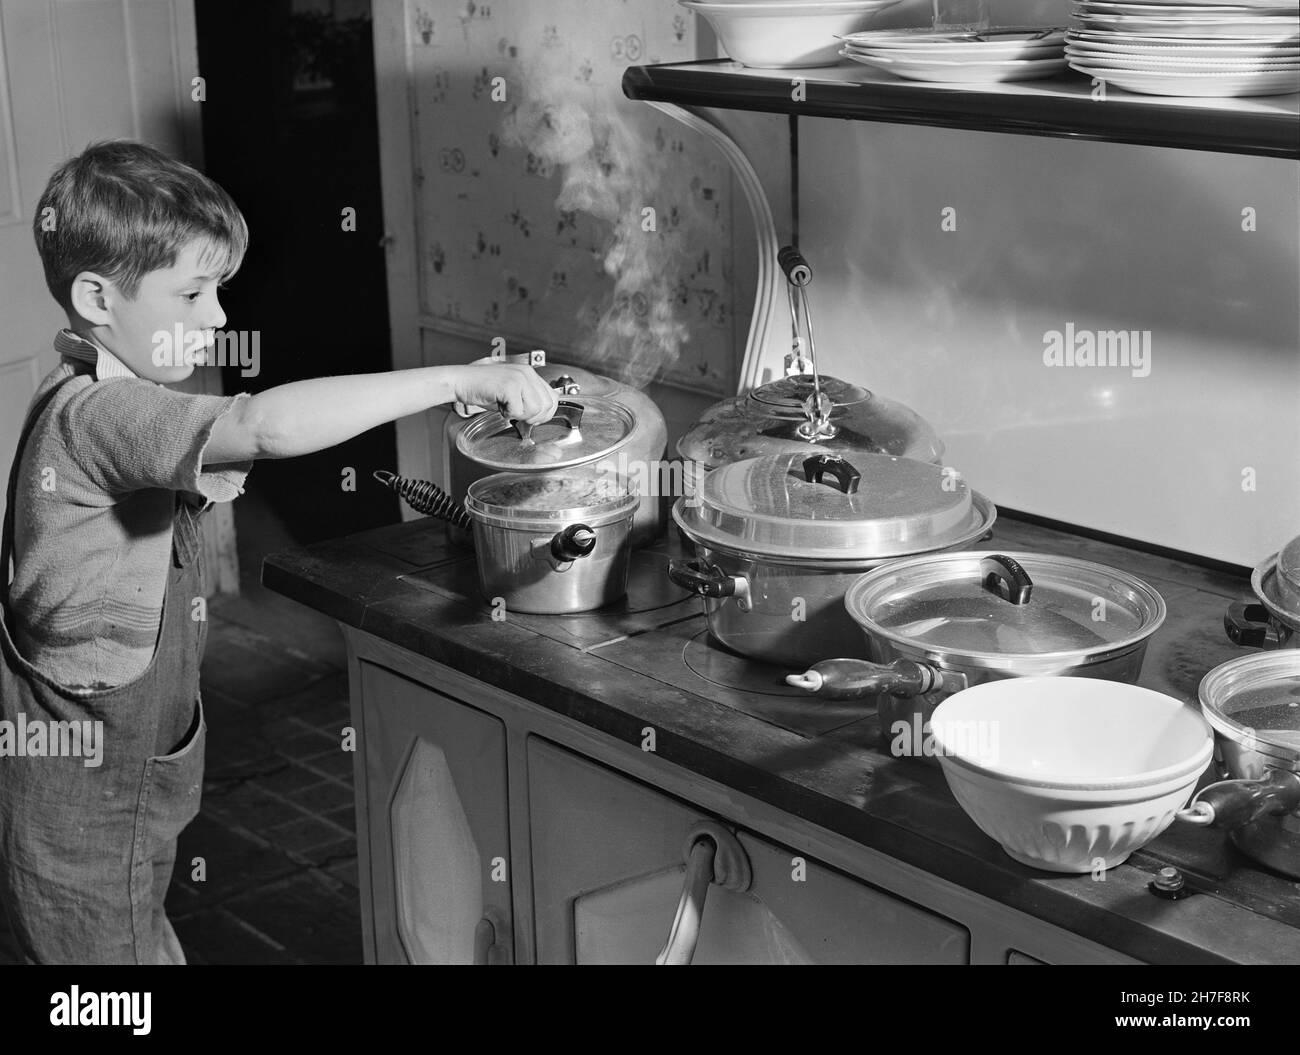 Young Boy checking Pots of Food on Stove for Thanksgiving Dinner, Ledyard, Connecticut, USA, Jack Delano, U.S. Farm Security Administration, U.S. Office of War Information Photograph Collection, November 1940 Stock Photo